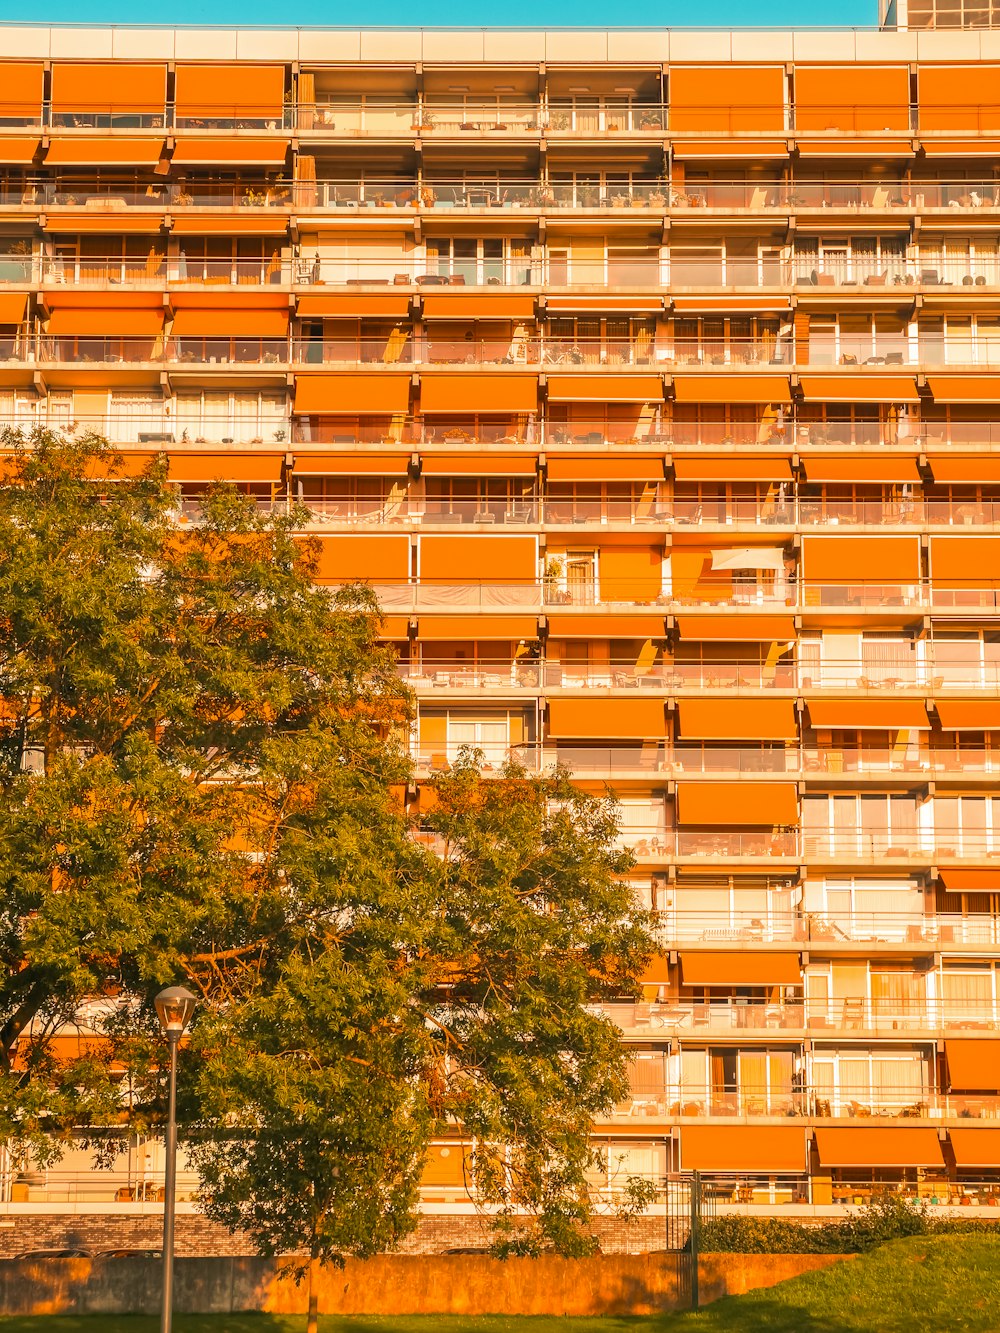 a tall orange building with balconies and balconies on it